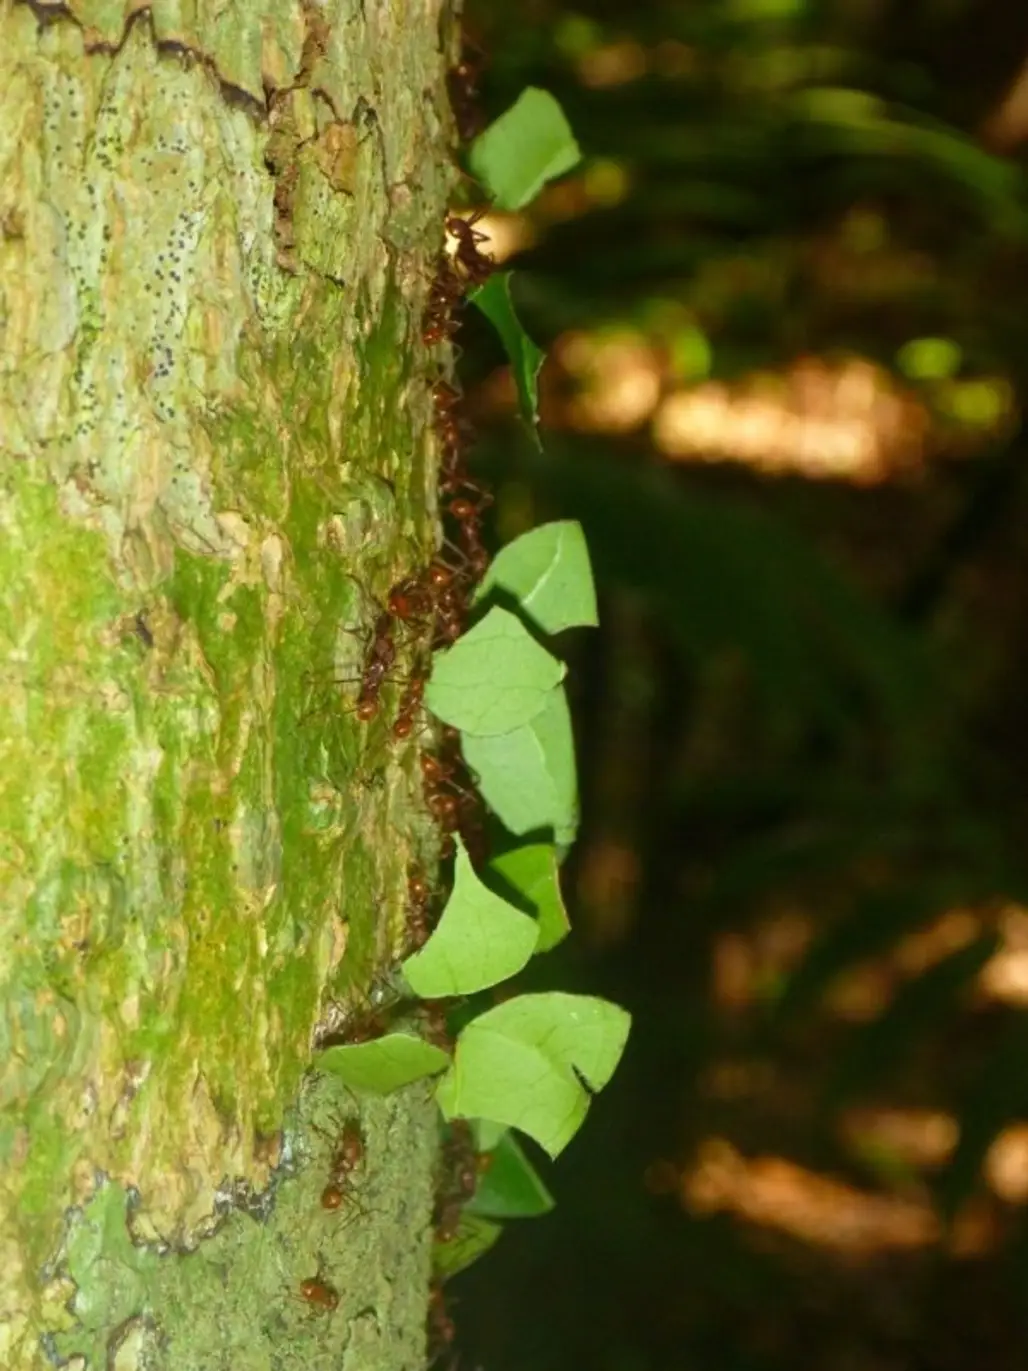 Leafcutter Ant